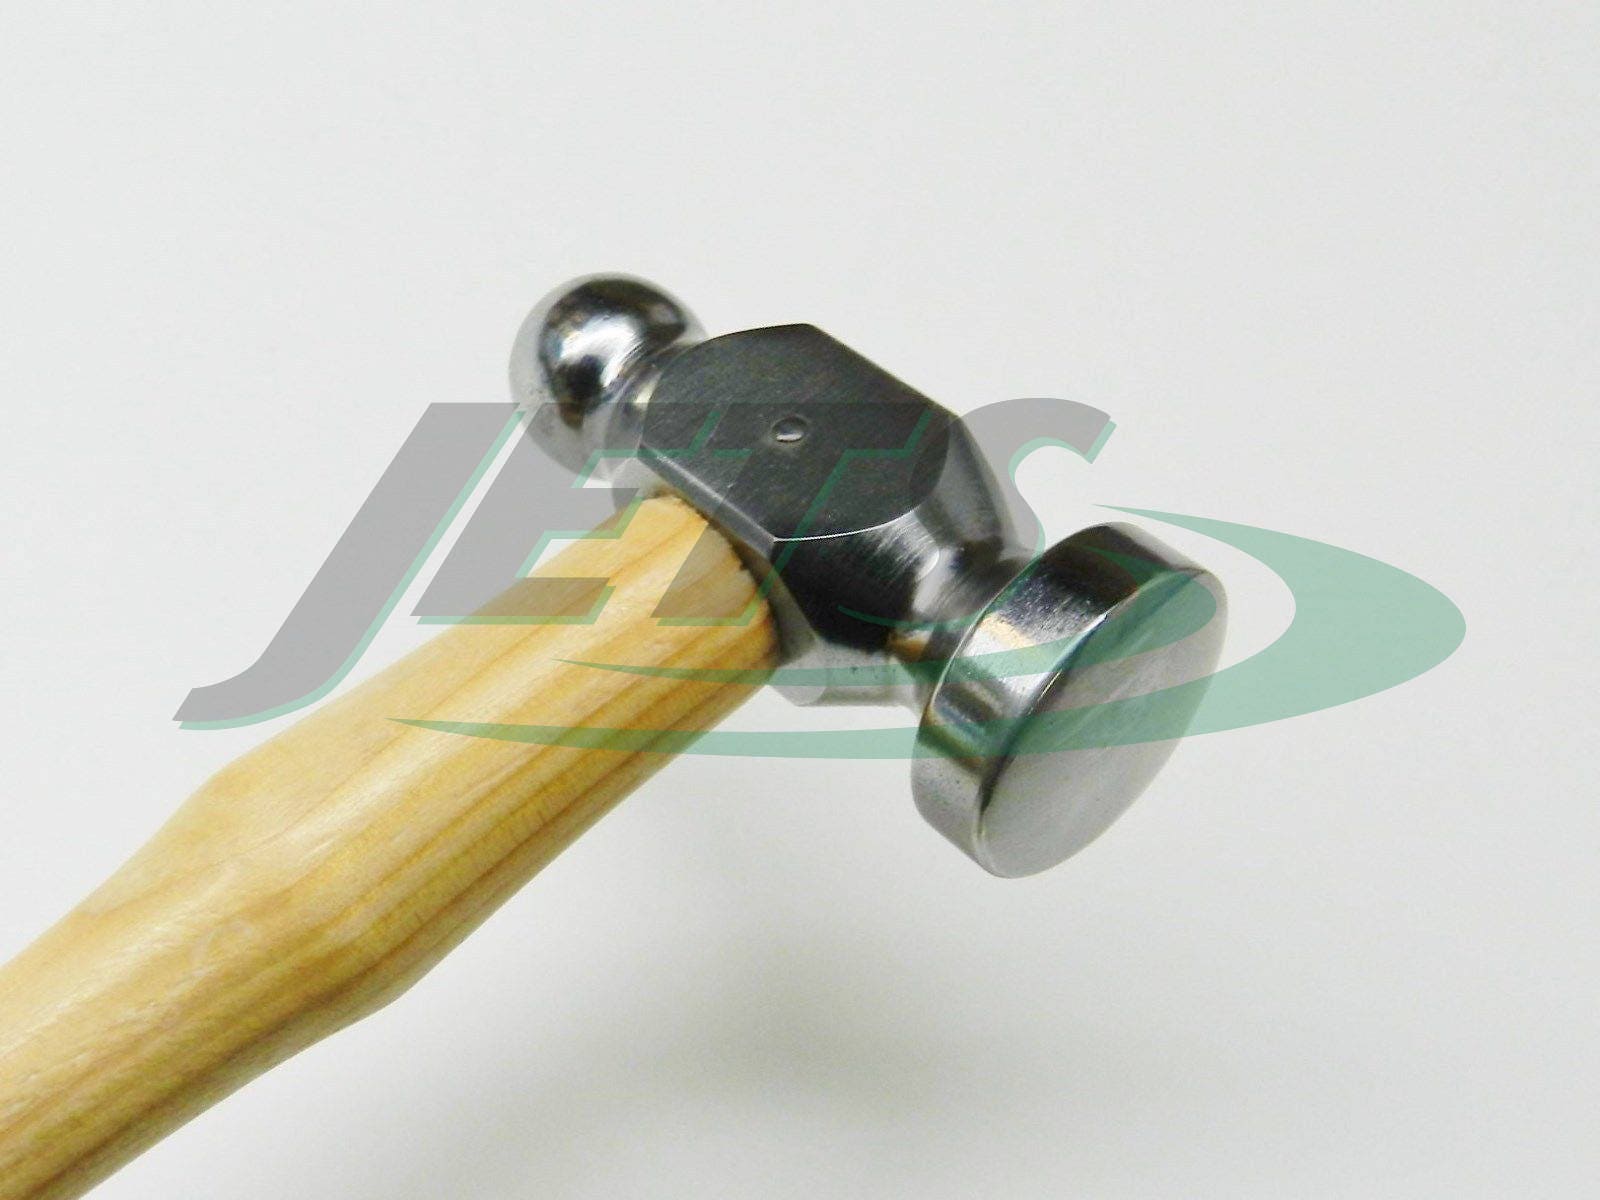 Jewelers Chasing Hammer 7/8 22mm Small Flat Face Jewelry Hammers Metalwork  A1 